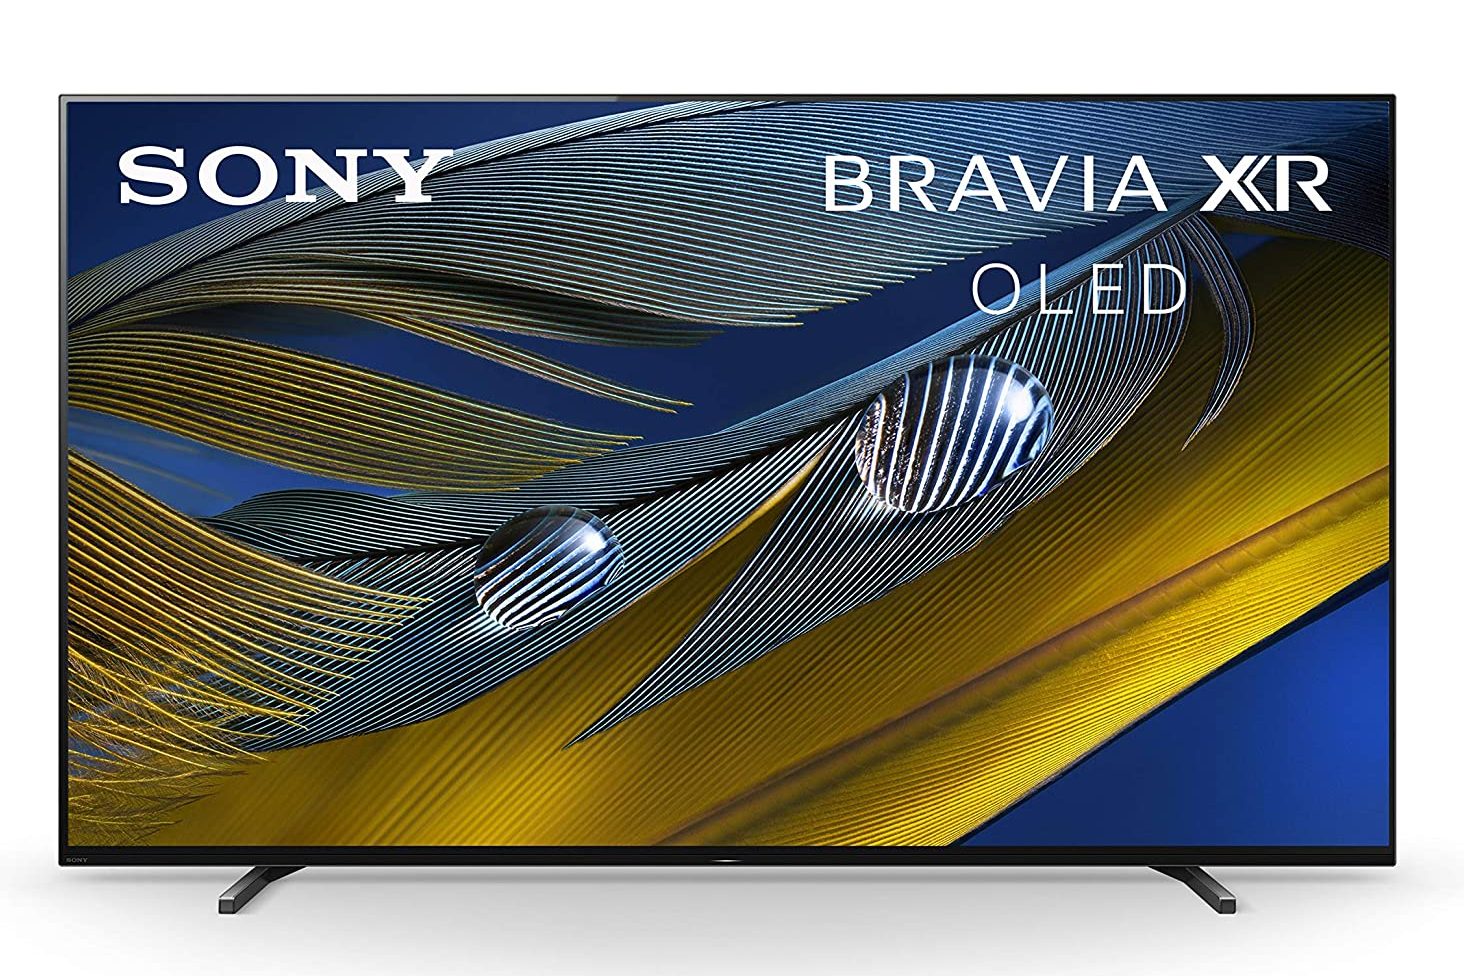 Sony Bravia XR A80J OLED TV is almost half price